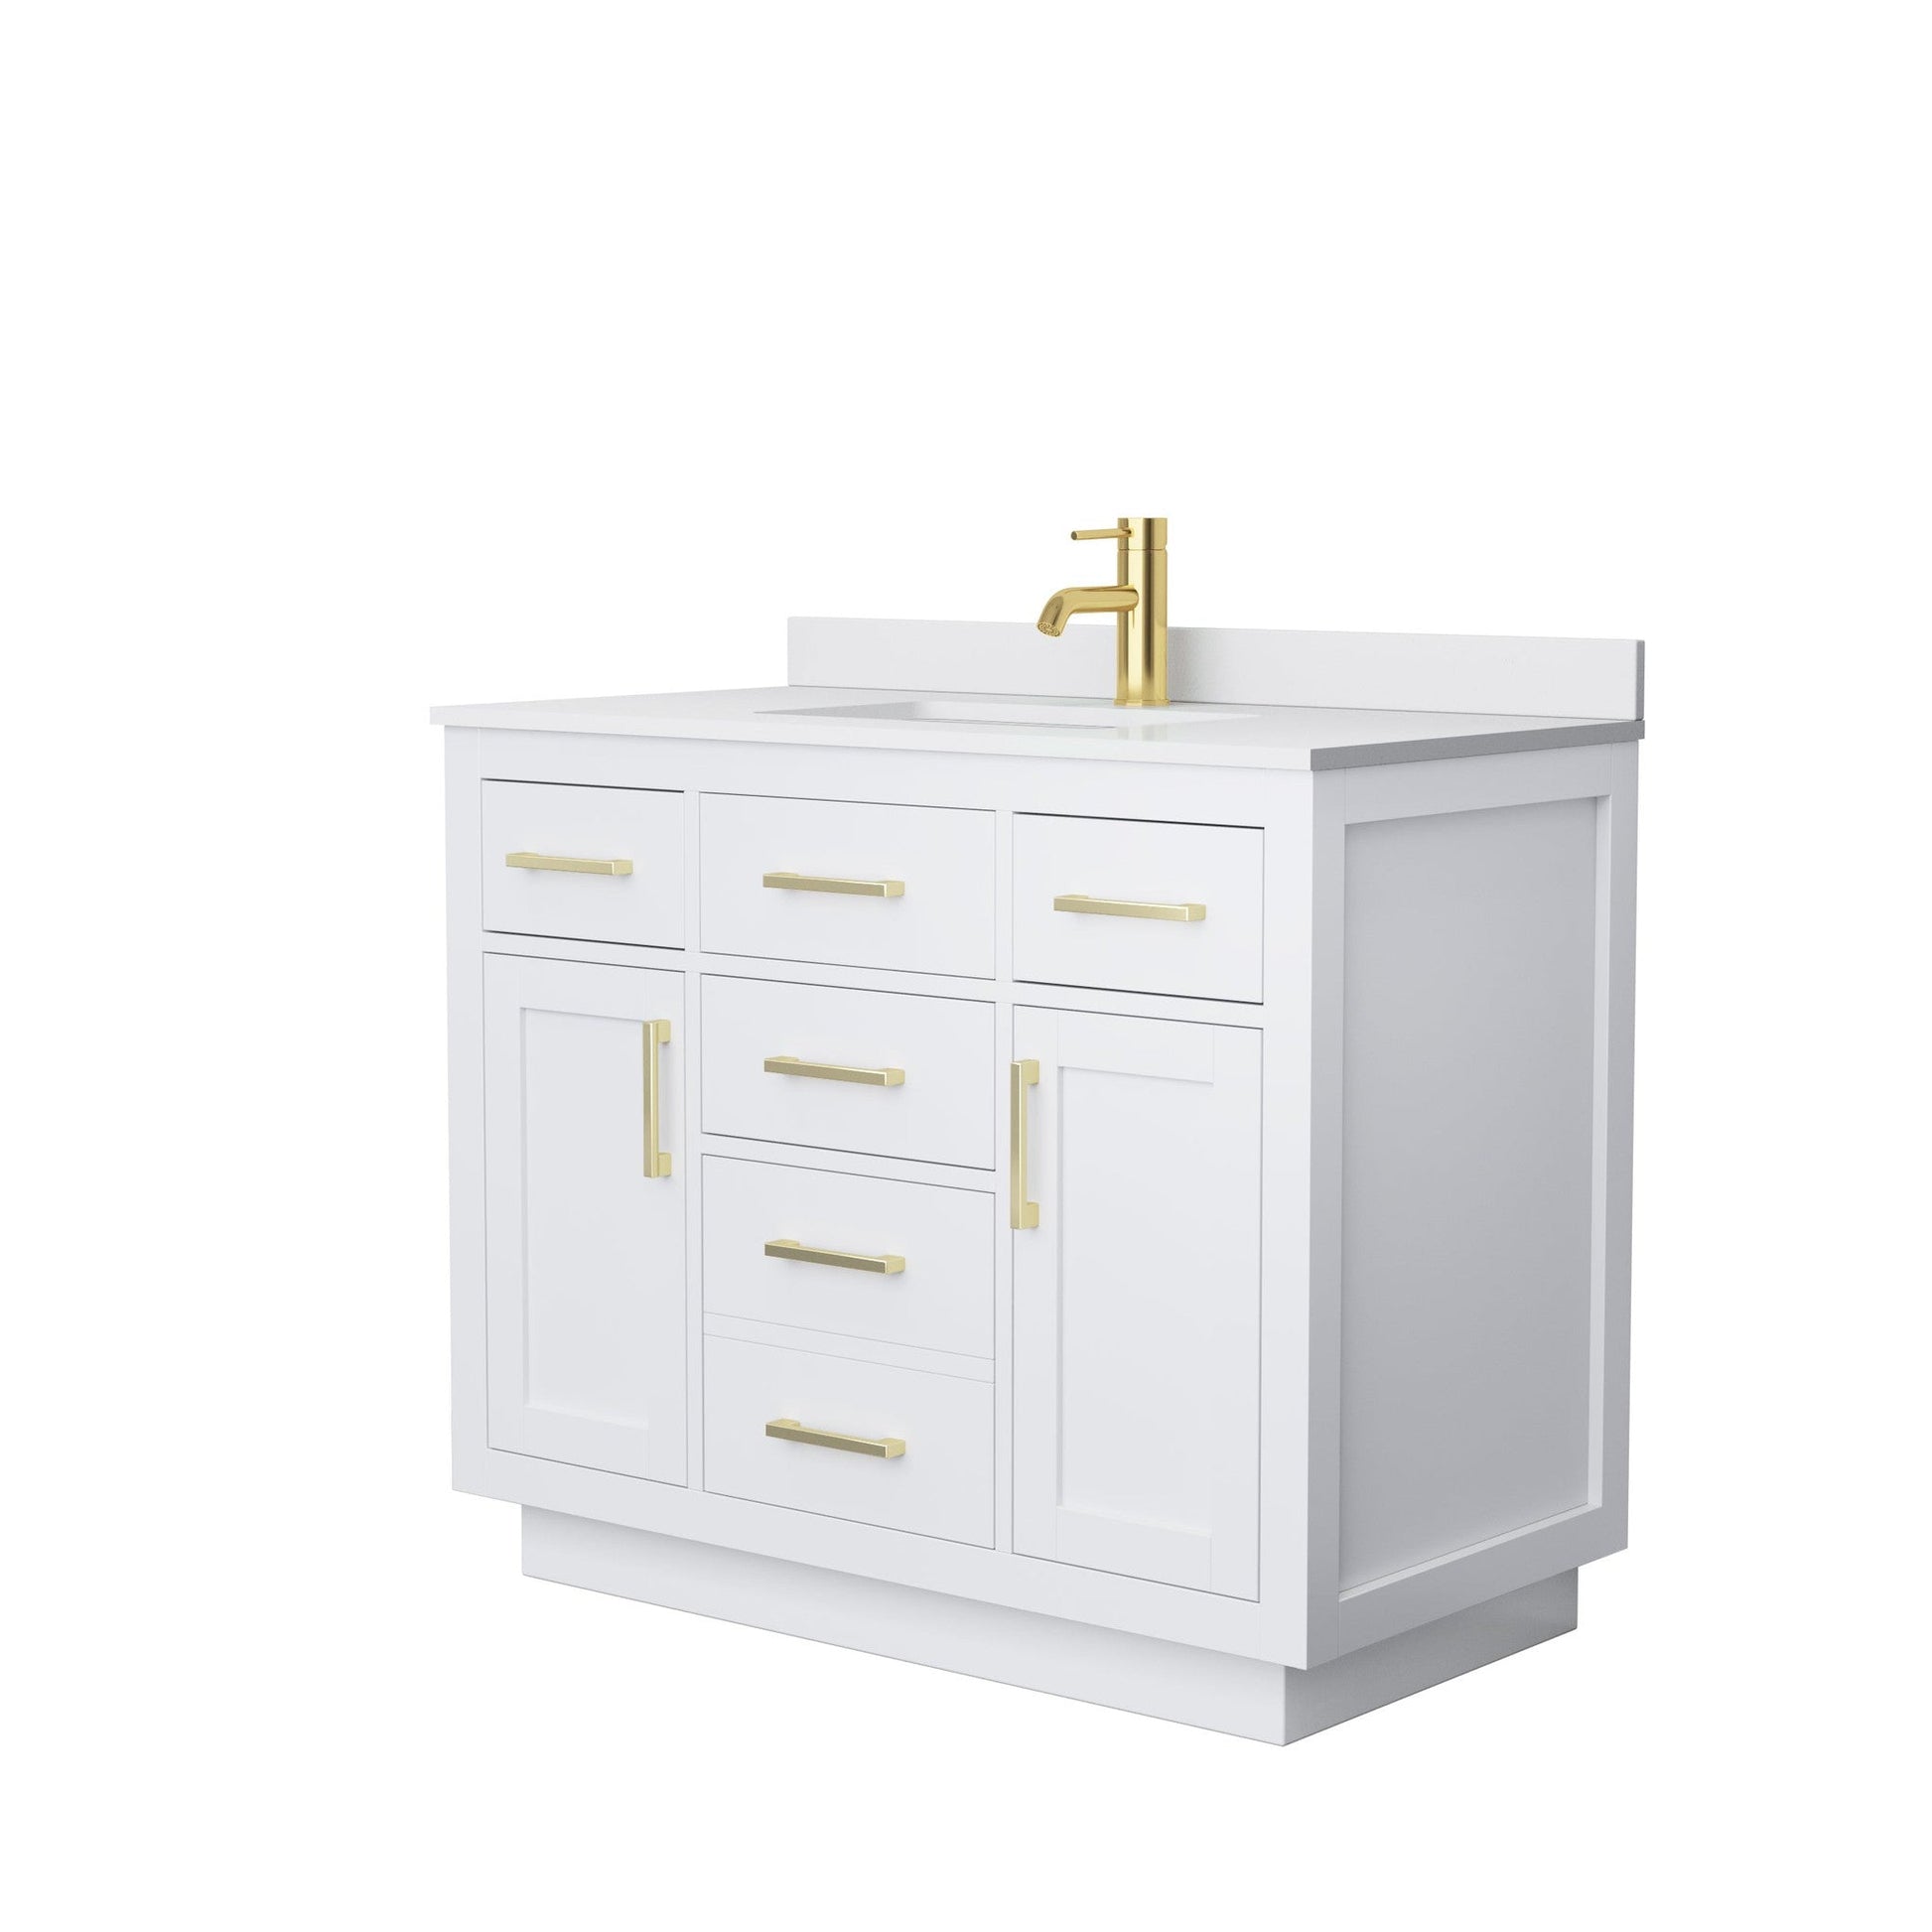 Beckett 42" Single Bathroom Vanity With Toe Kick in White, White Cultured Marble Countertop, Undermount Square Sink, Brushed Gold Trim